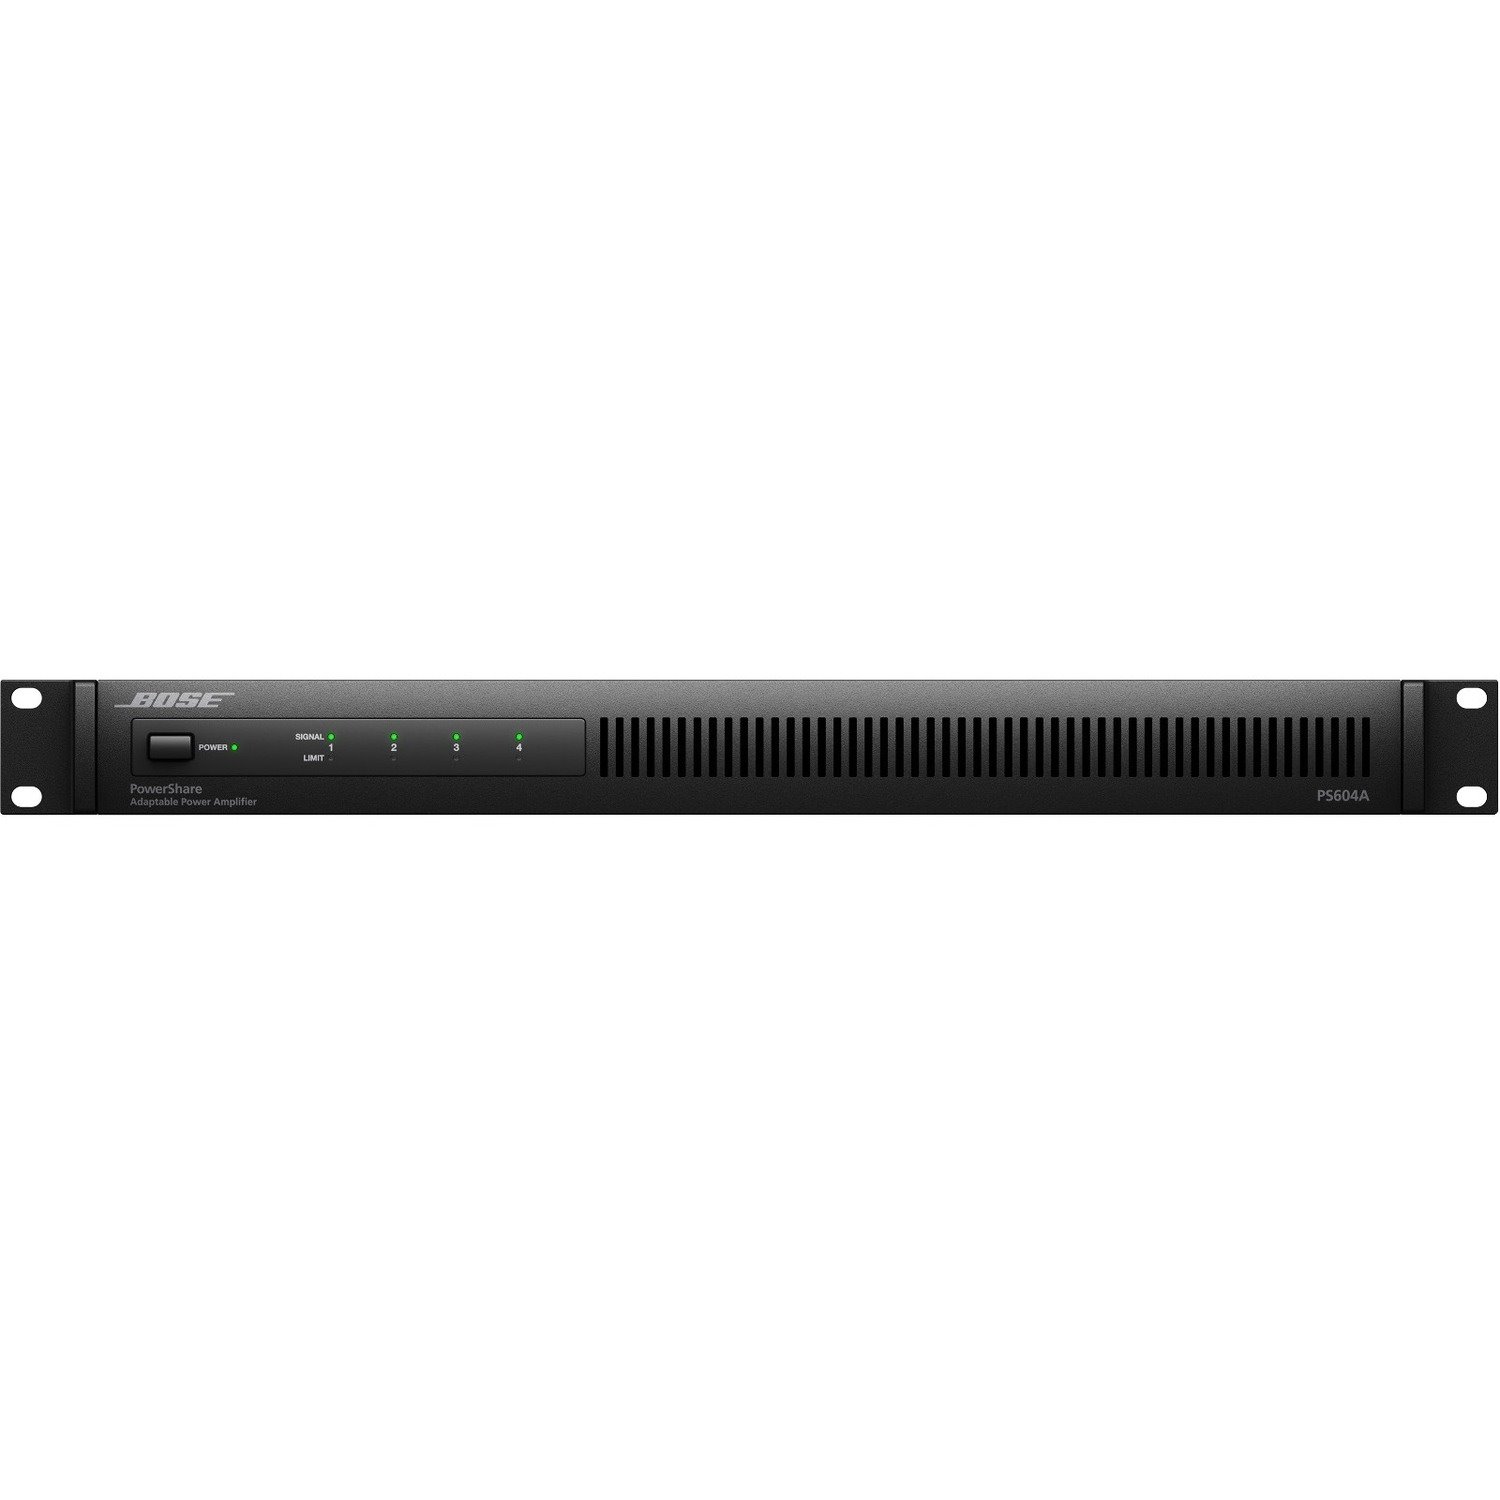 Bose PowerShare PS404A Amplifier - 600 W RMS - 4 Channel